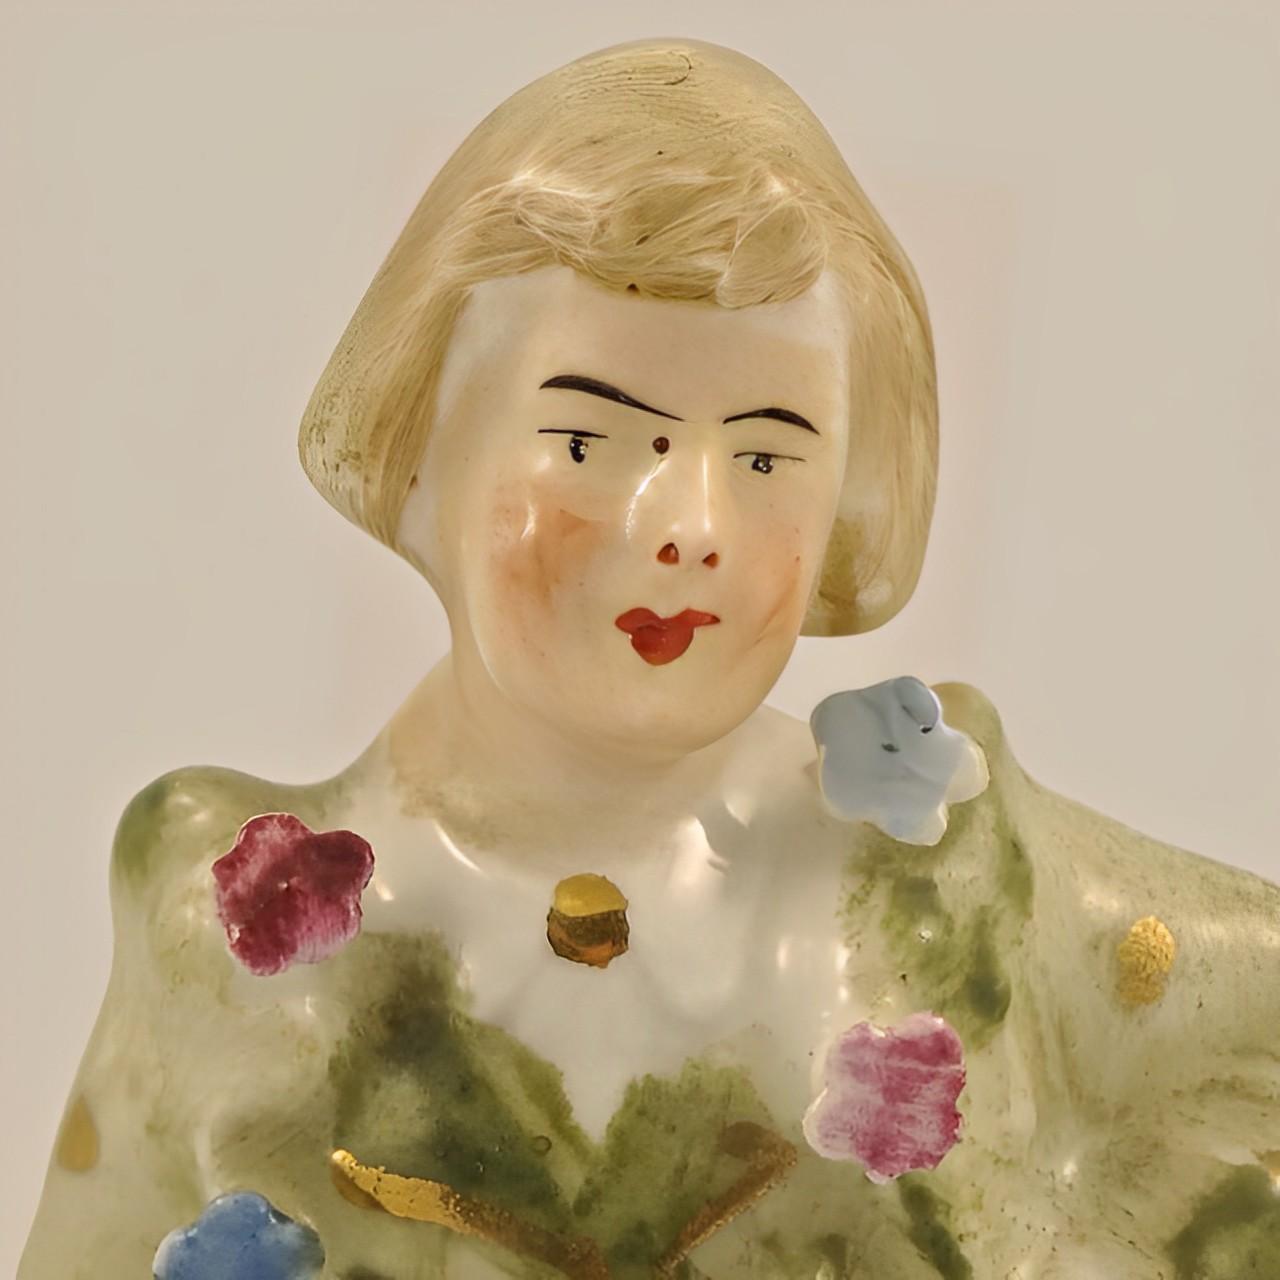 Lovely antique hand painted porcelain man figurine, with blue and pink flowers and gold detail. This antique figurine is in very good condition.

He would look wonderful in any room.